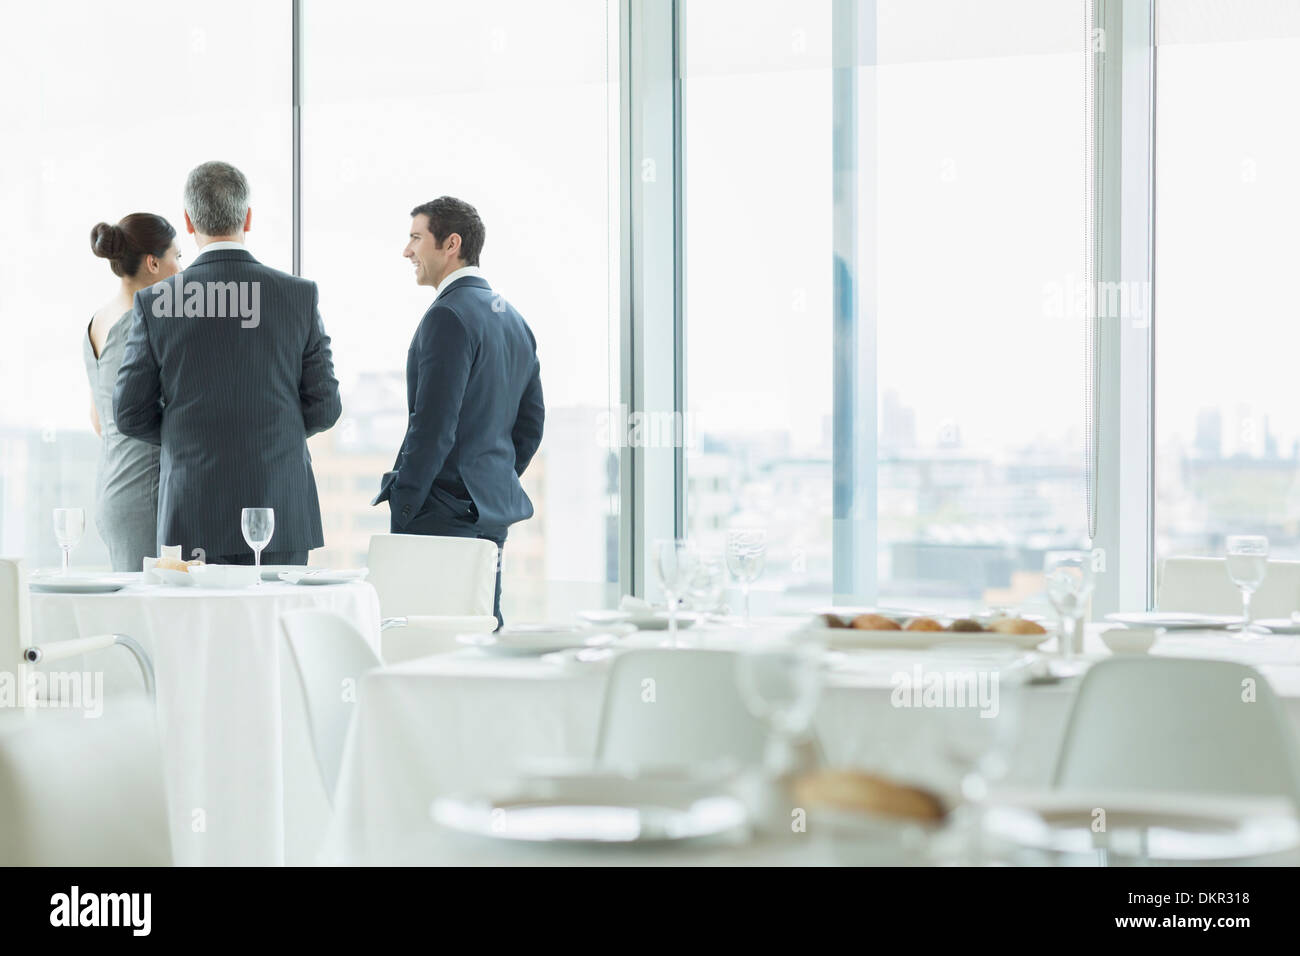 Business people talking in restaurant Banque D'Images